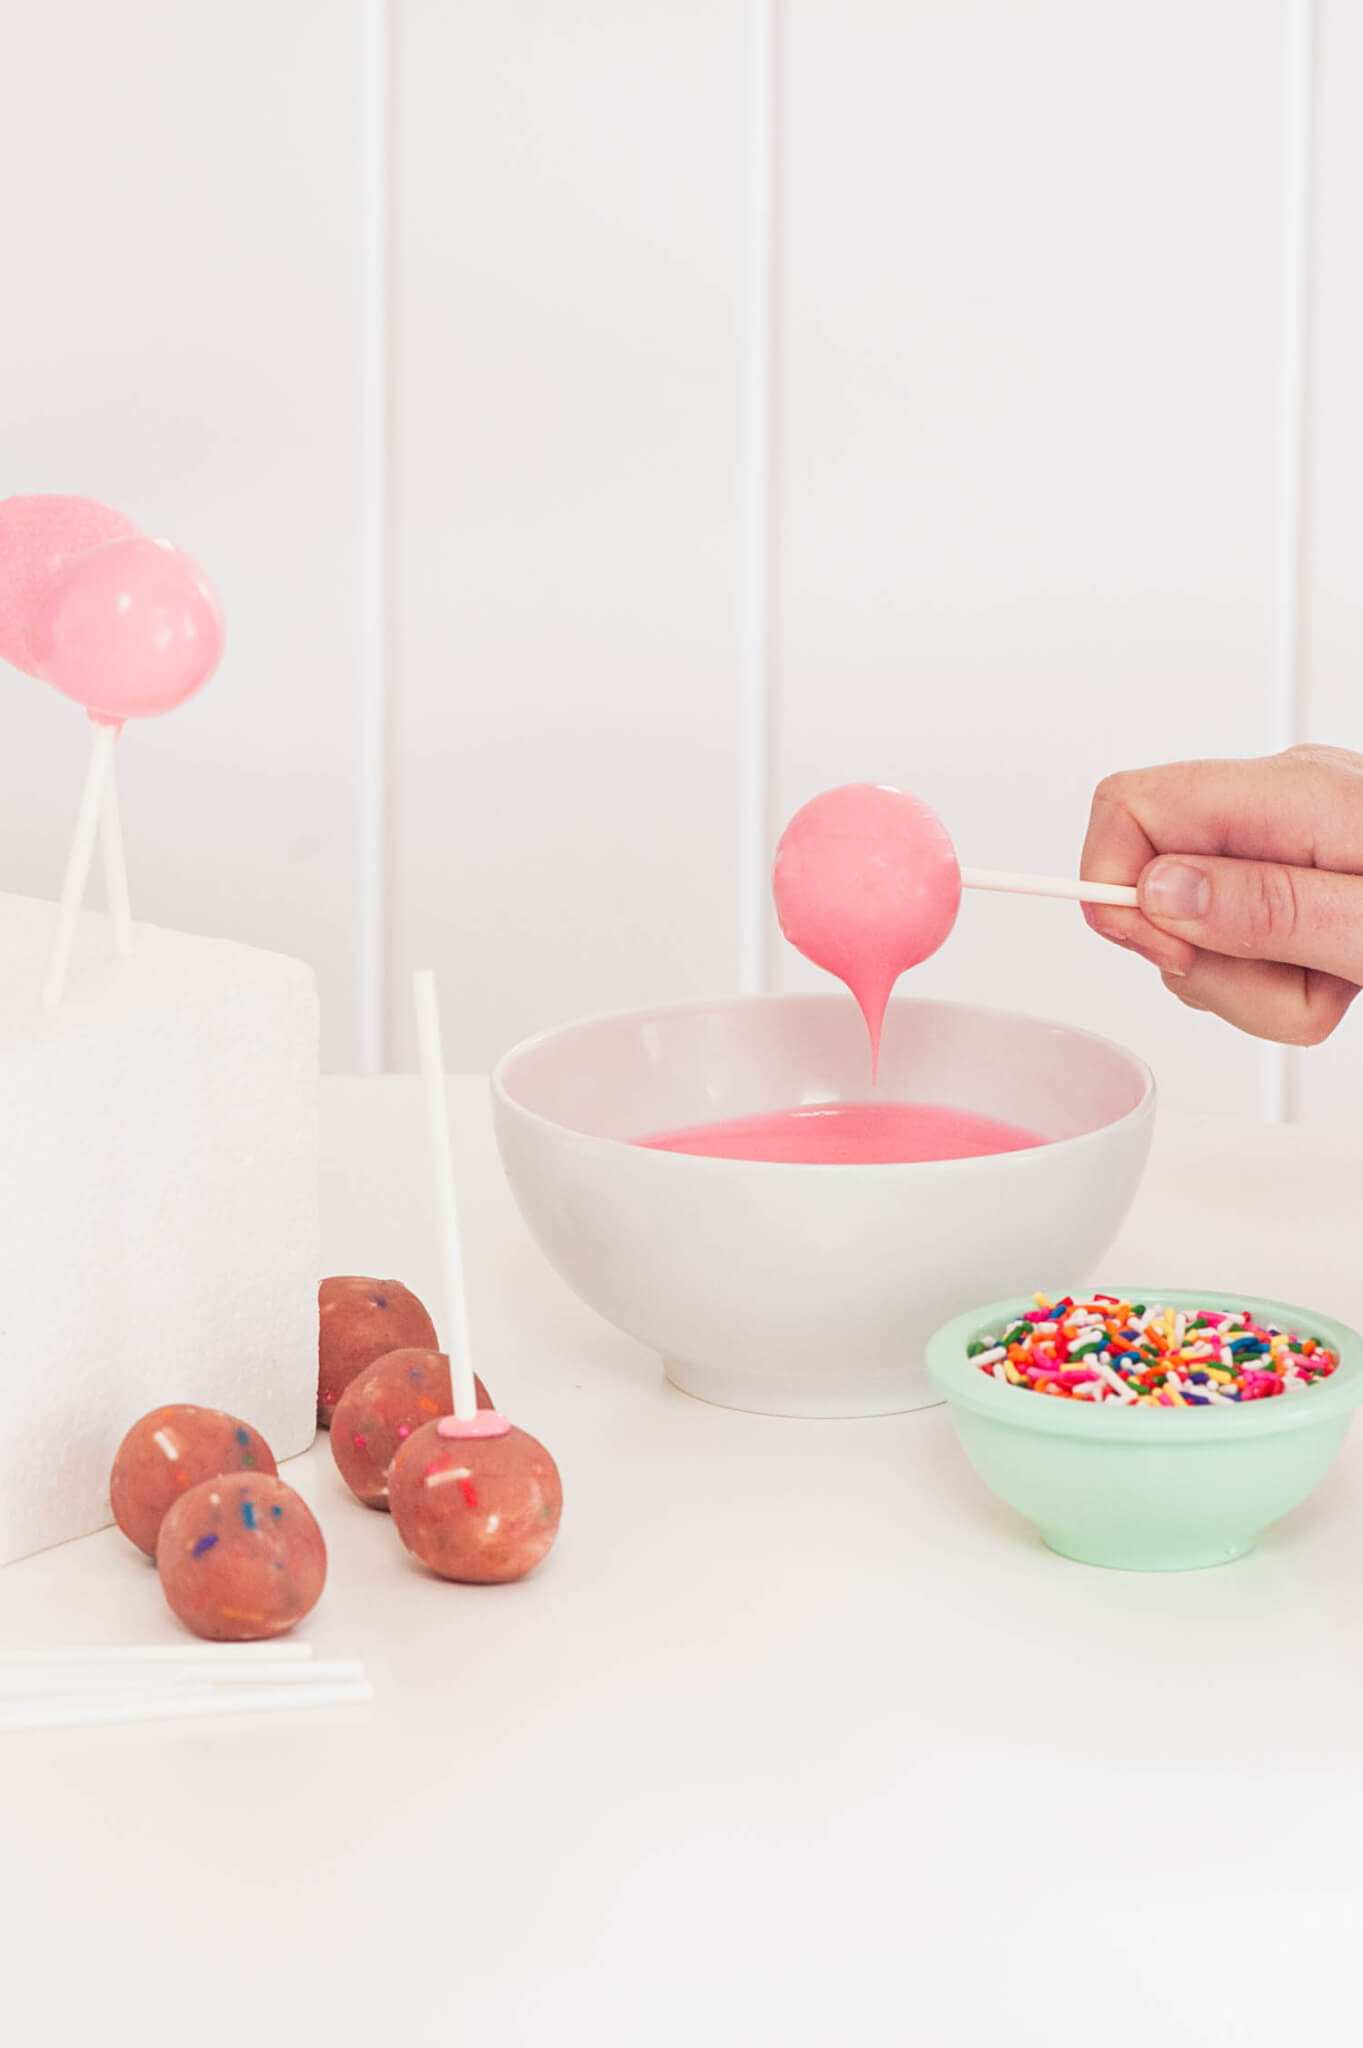 Strawberry Confetti Cake Pops being dipped in pink melting chocolate